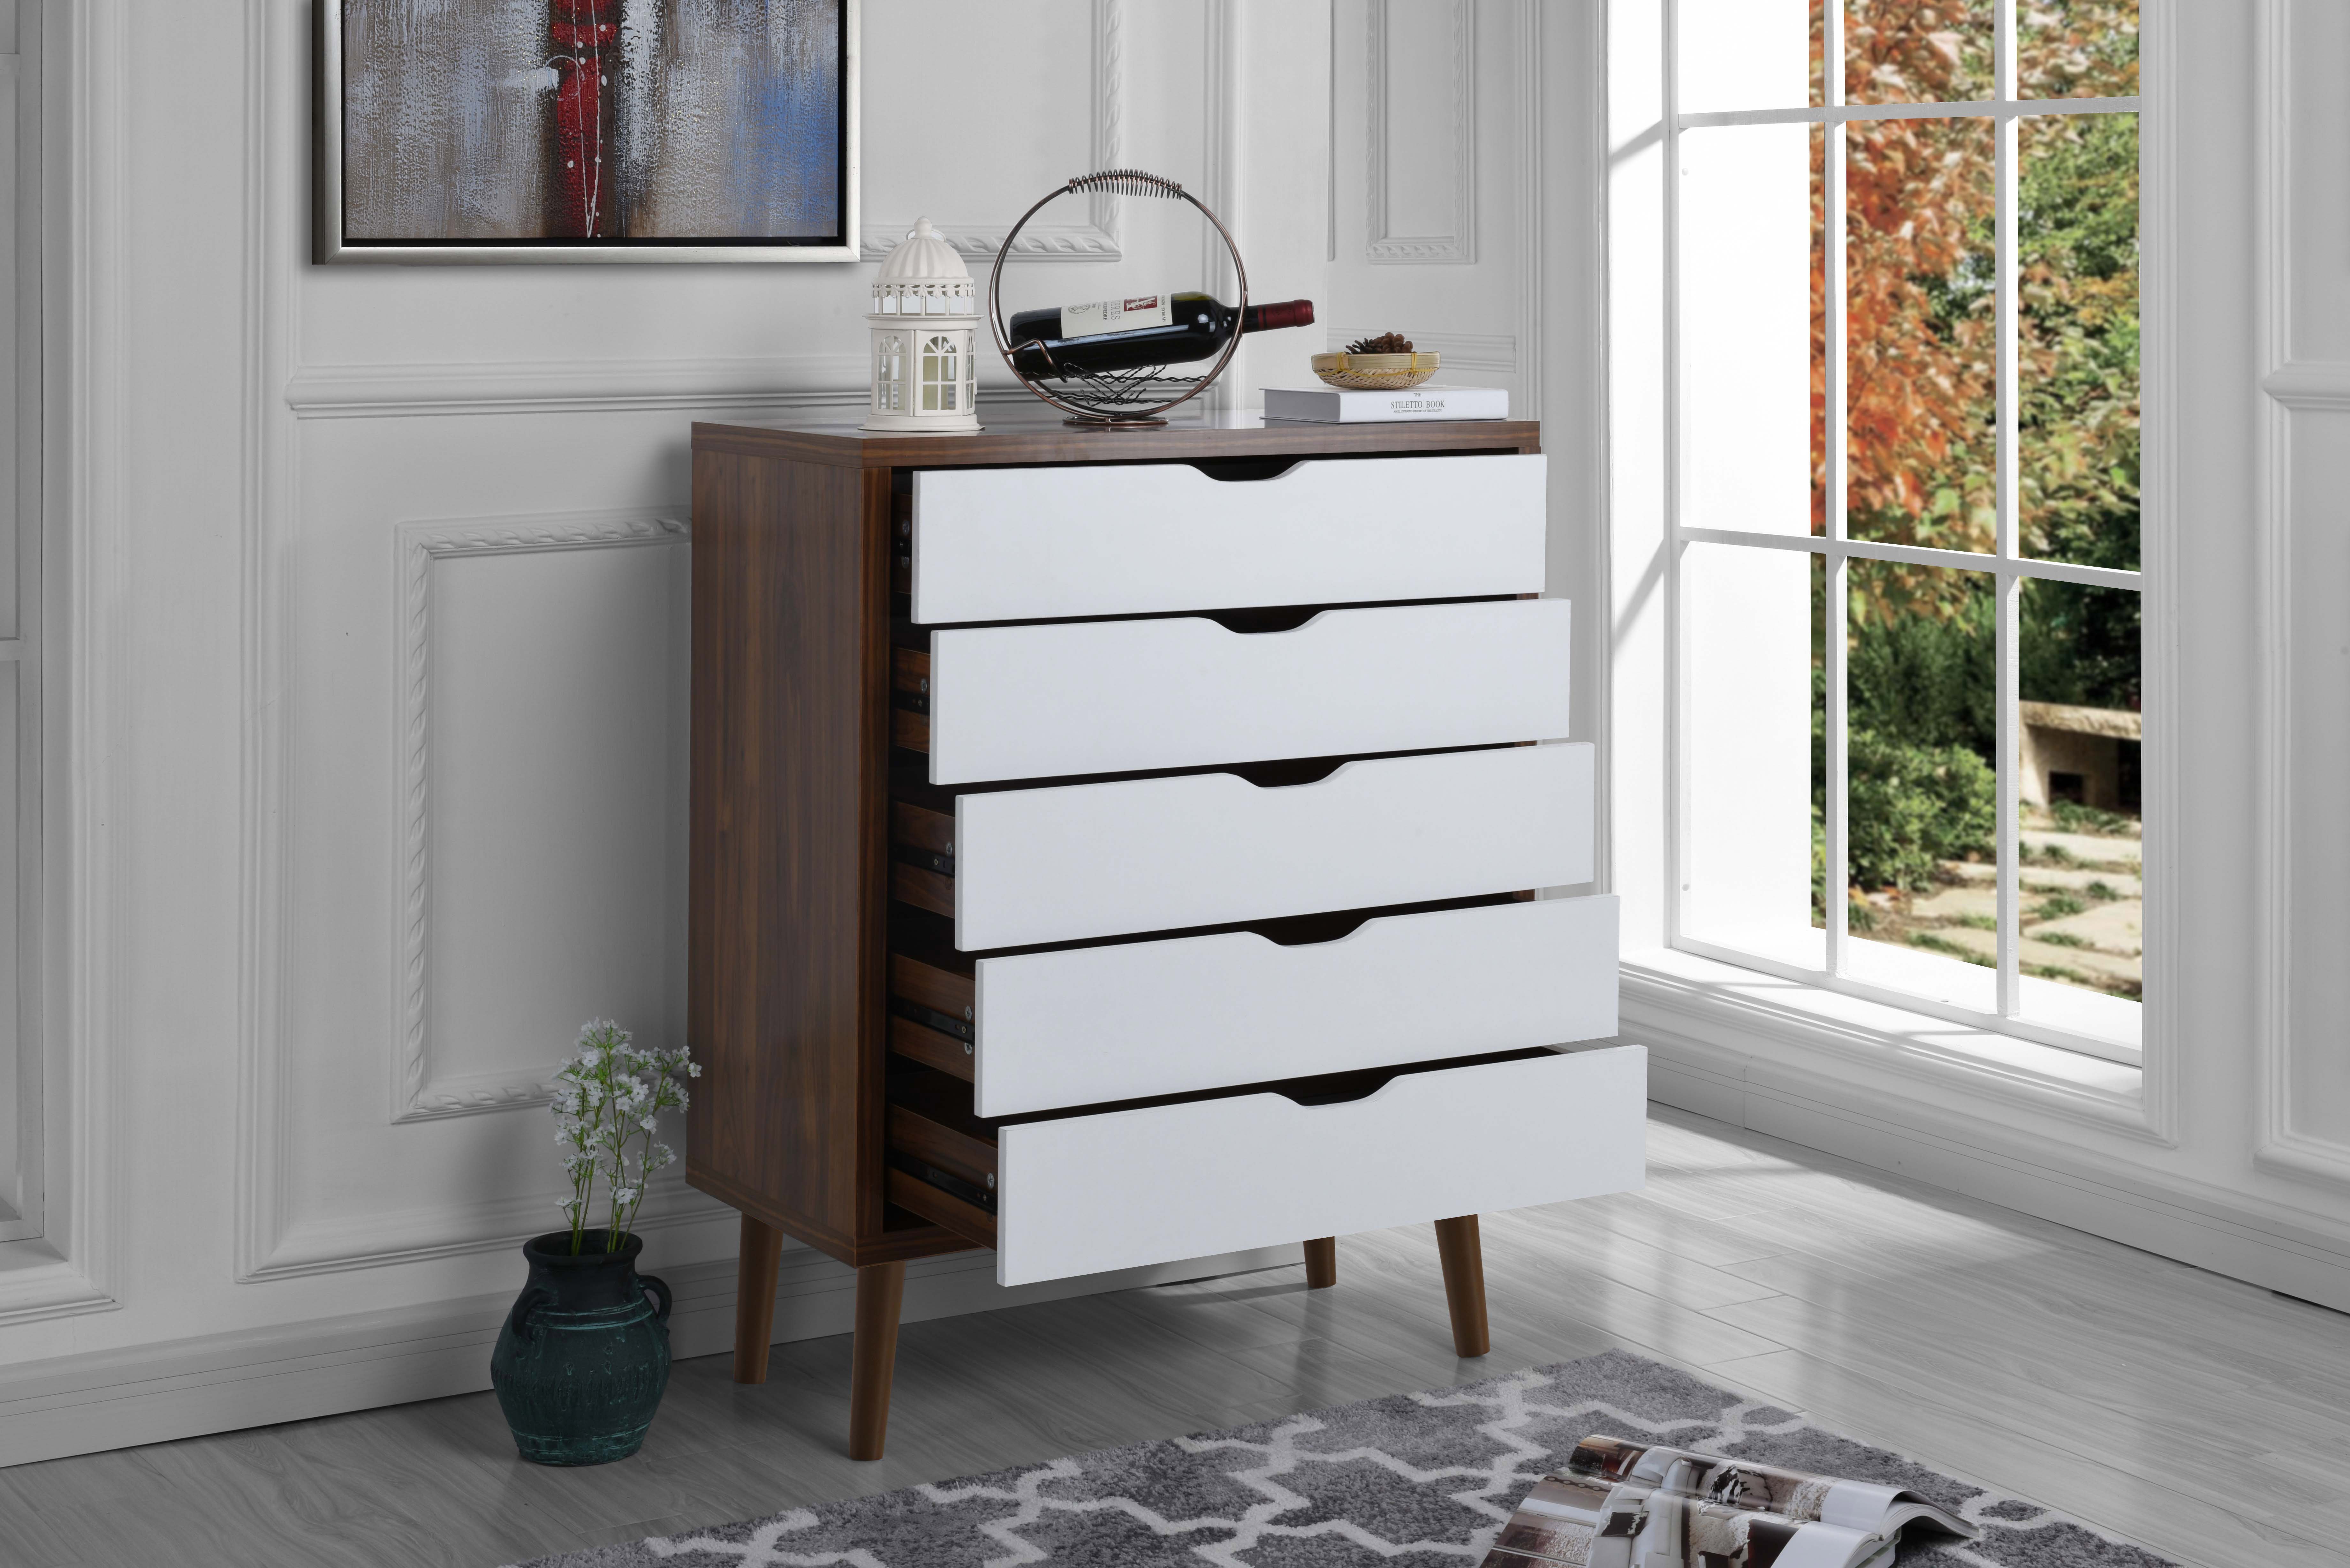 Details About Mid Century Modern Home Decor Entryway Dresser Chest Of Drawers Brown White